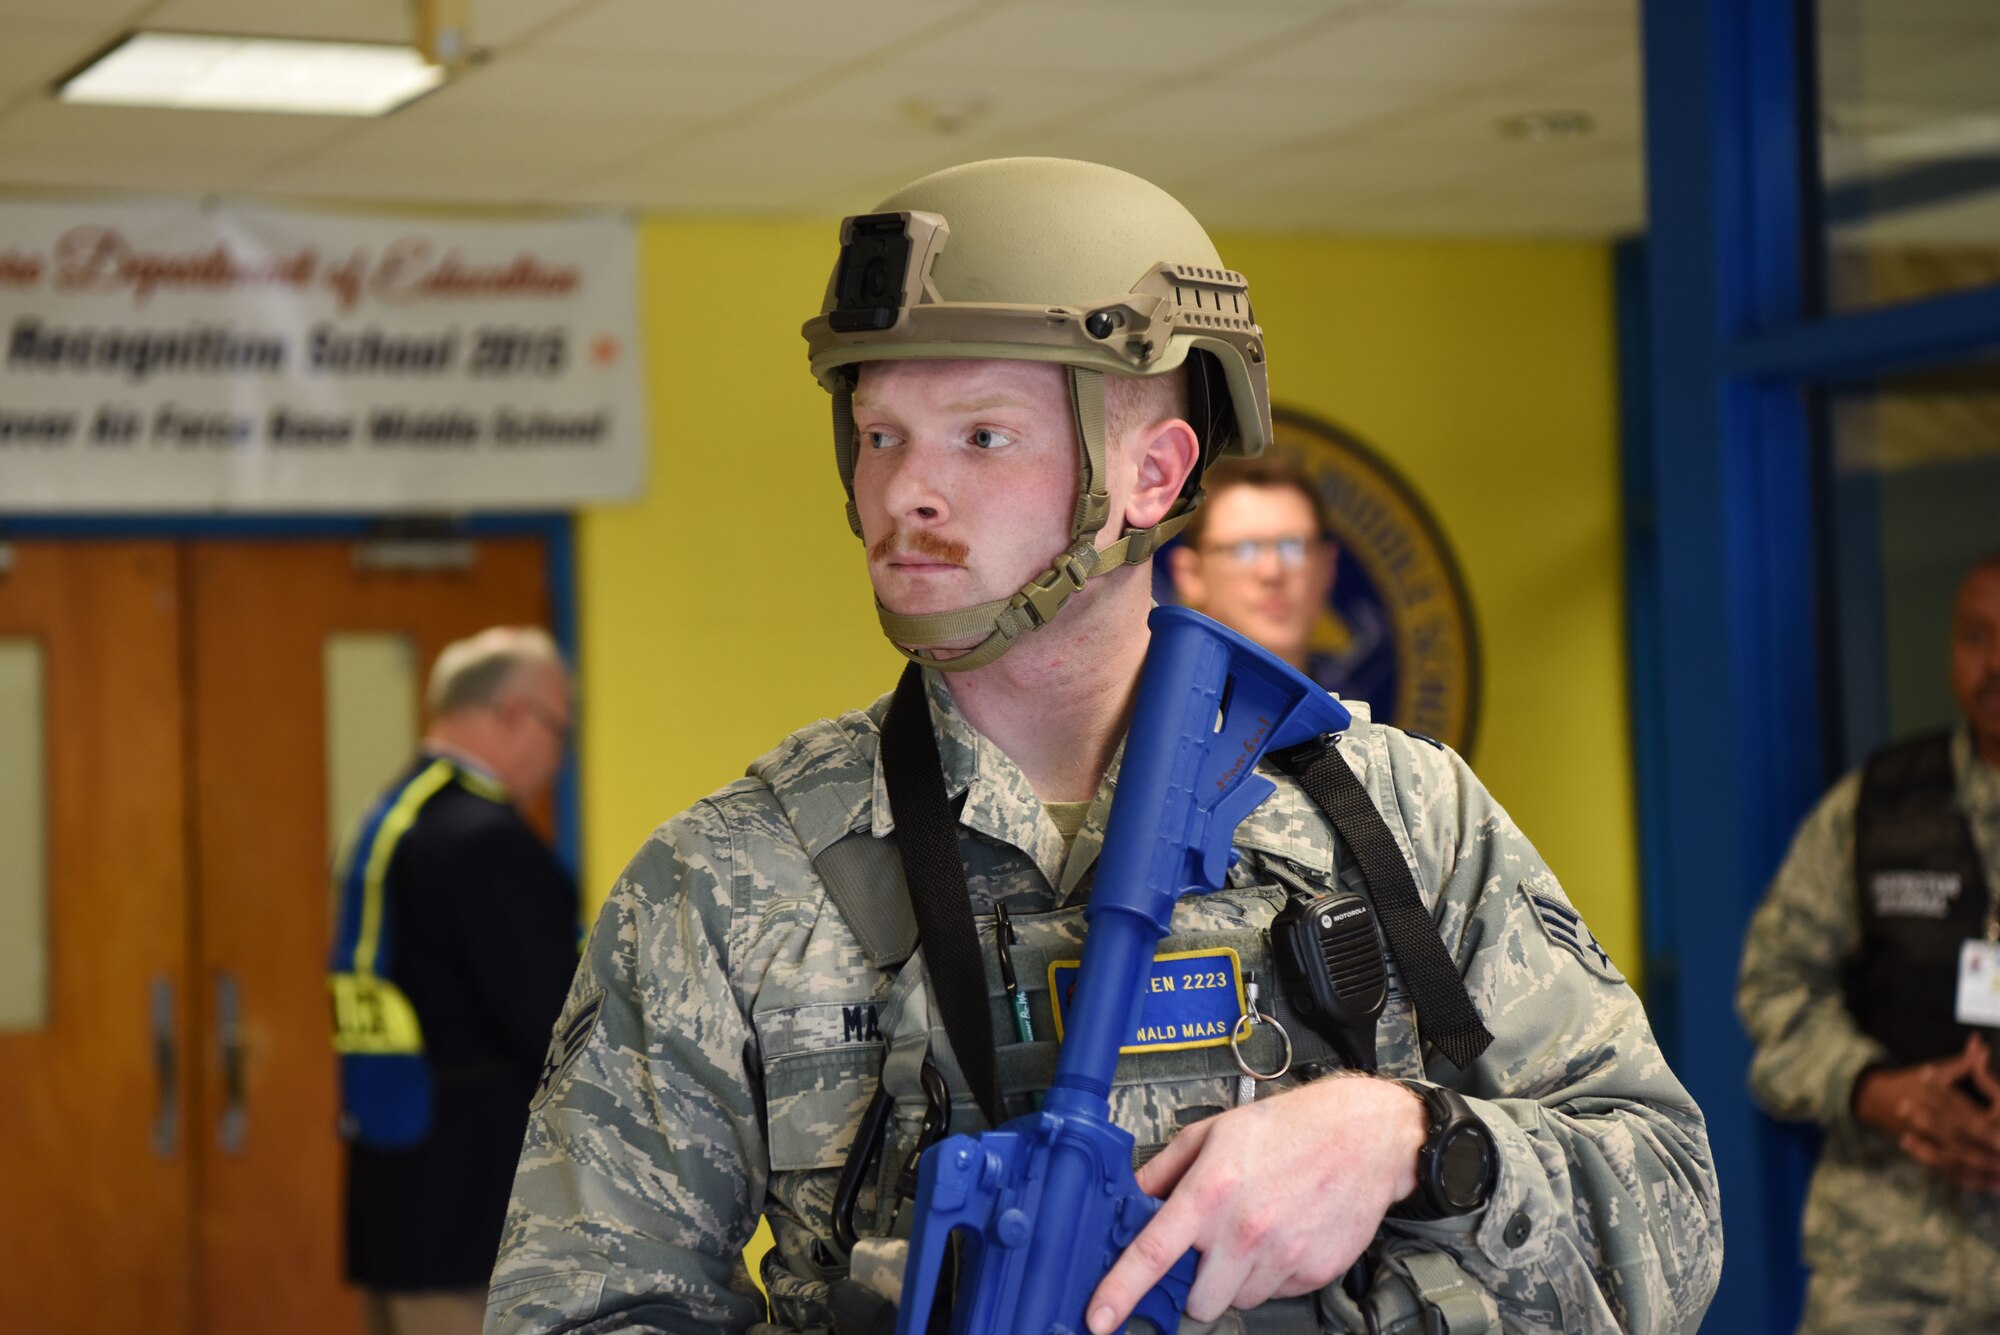 Senior Airman Donald Maas, 436th Security Forces Squadron raven, stands guard in the George S. Welch Elementary School during an active shooter exercise Feb. 26, 2018, at Dover Air Force Base, Del. Every member of Security Forces, no matter the rank, is responsible for knowing and understanding the response procedures in the event of a real-world active shooter. (U.S. Air Force photo by Airman 1st Class Zoe M. Wockenfuss)